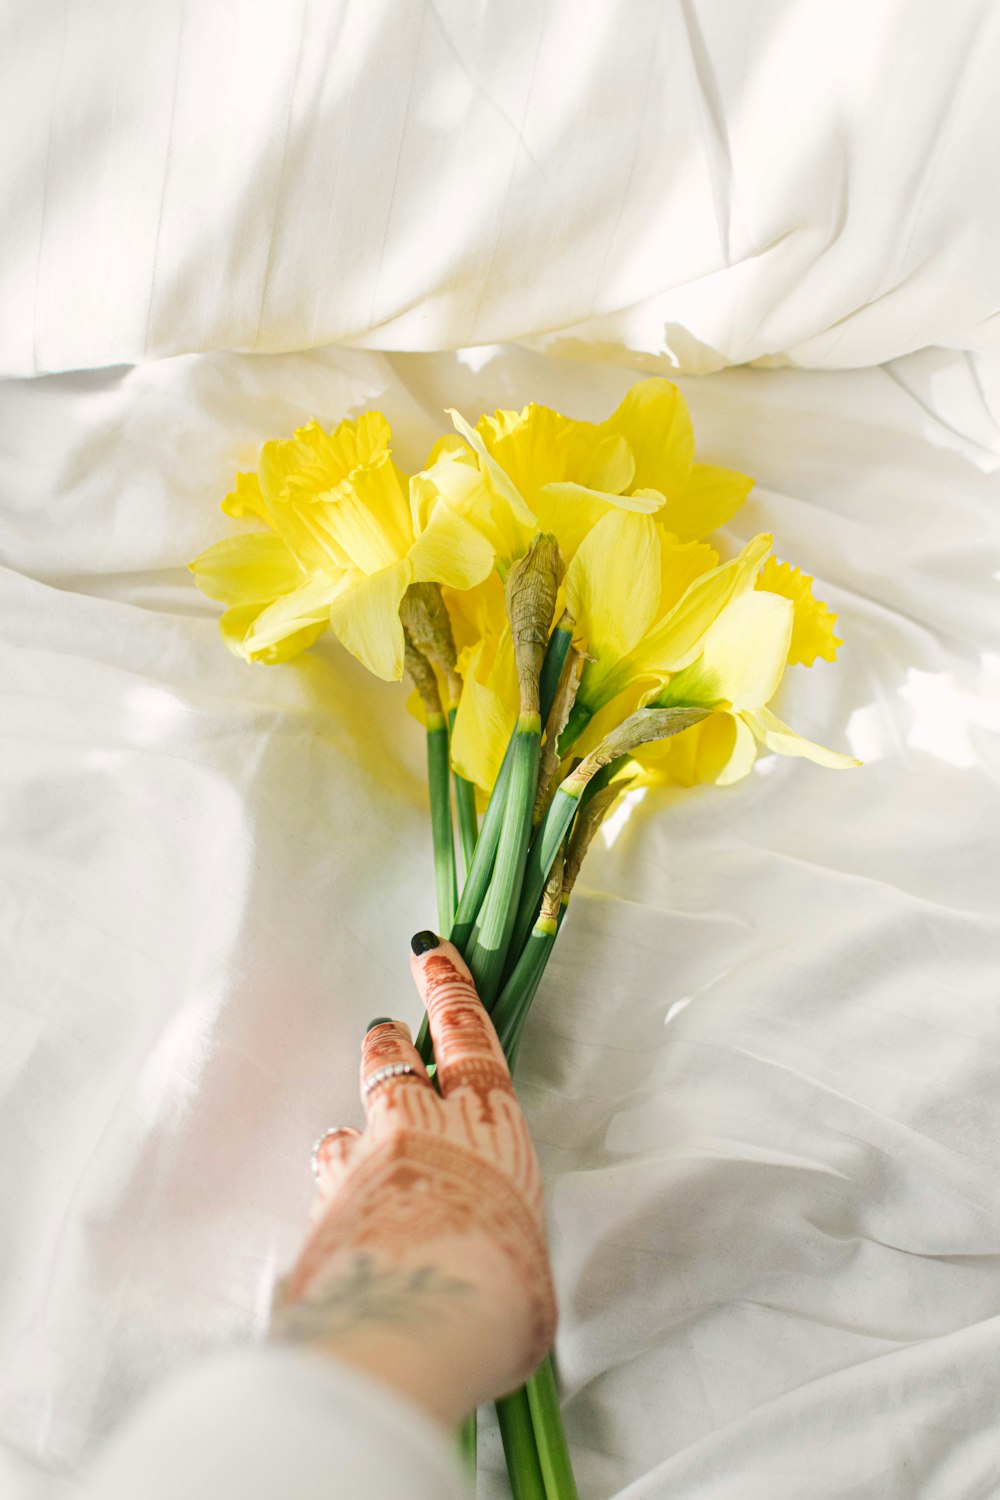 person holding yellow daffodils in white textile